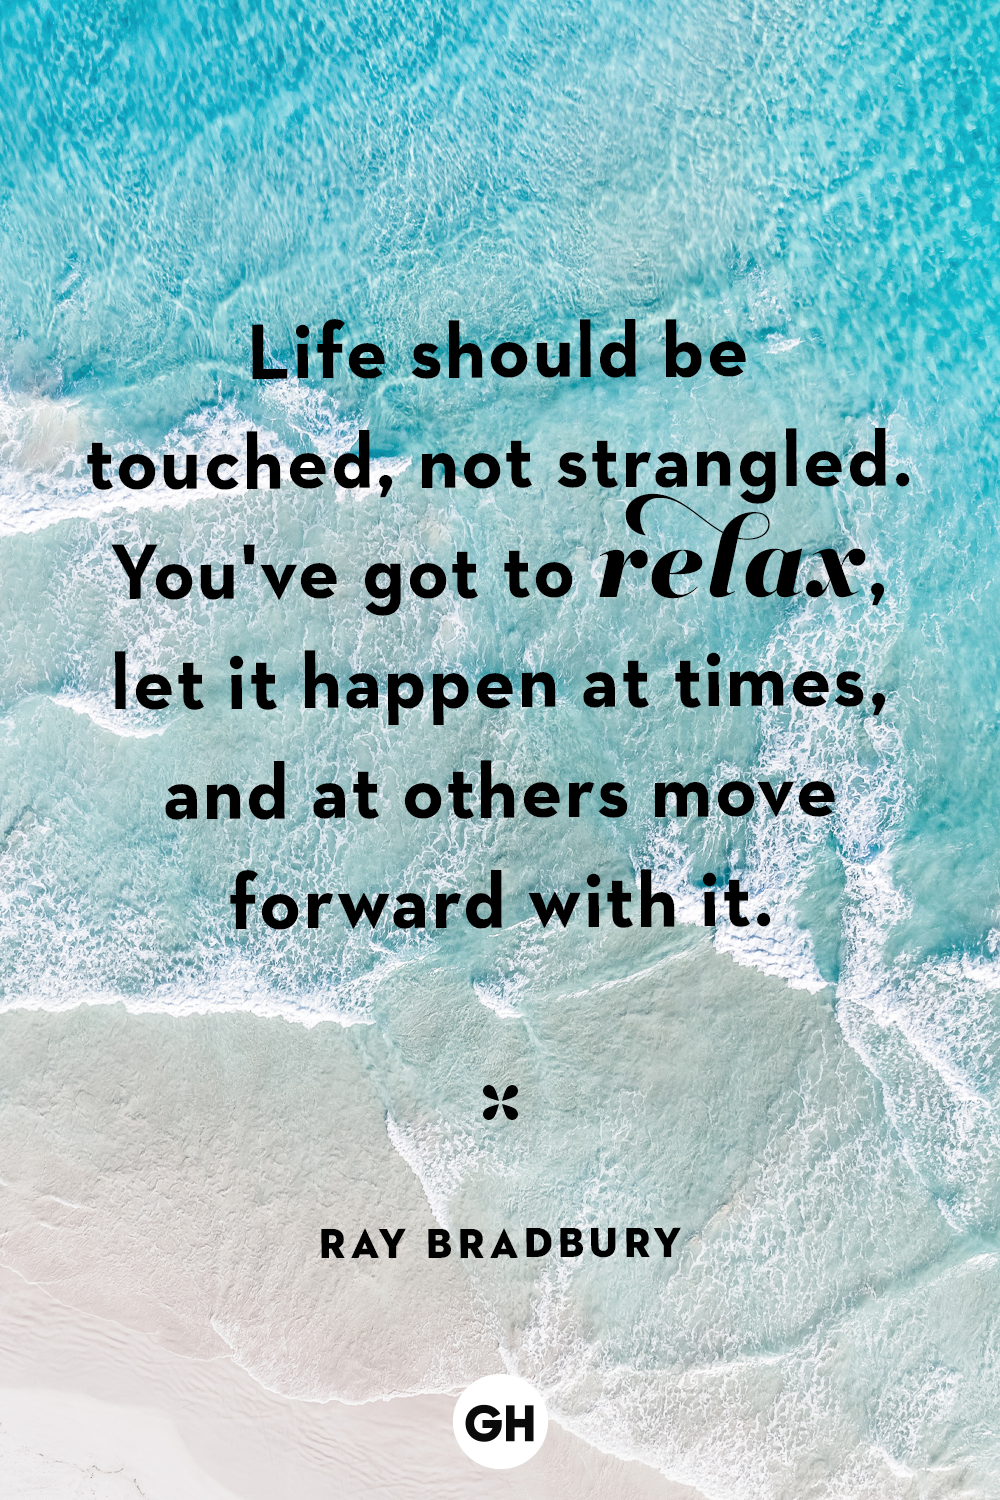 life should be touched, not strangled you’ve got to relax, let it happen at times, and at others move forward with it